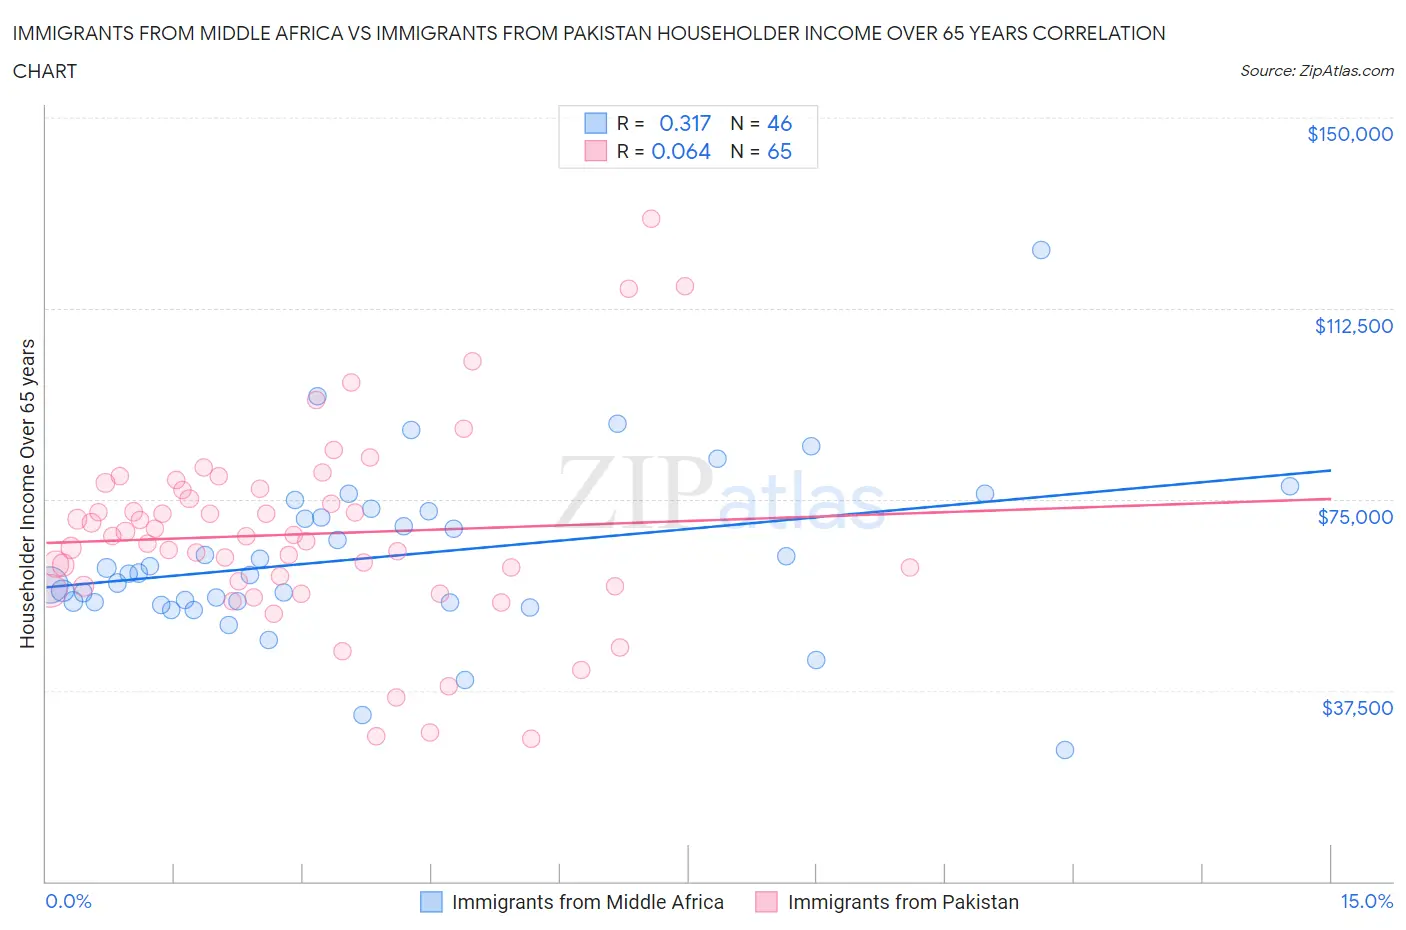 Immigrants from Middle Africa vs Immigrants from Pakistan Householder Income Over 65 years